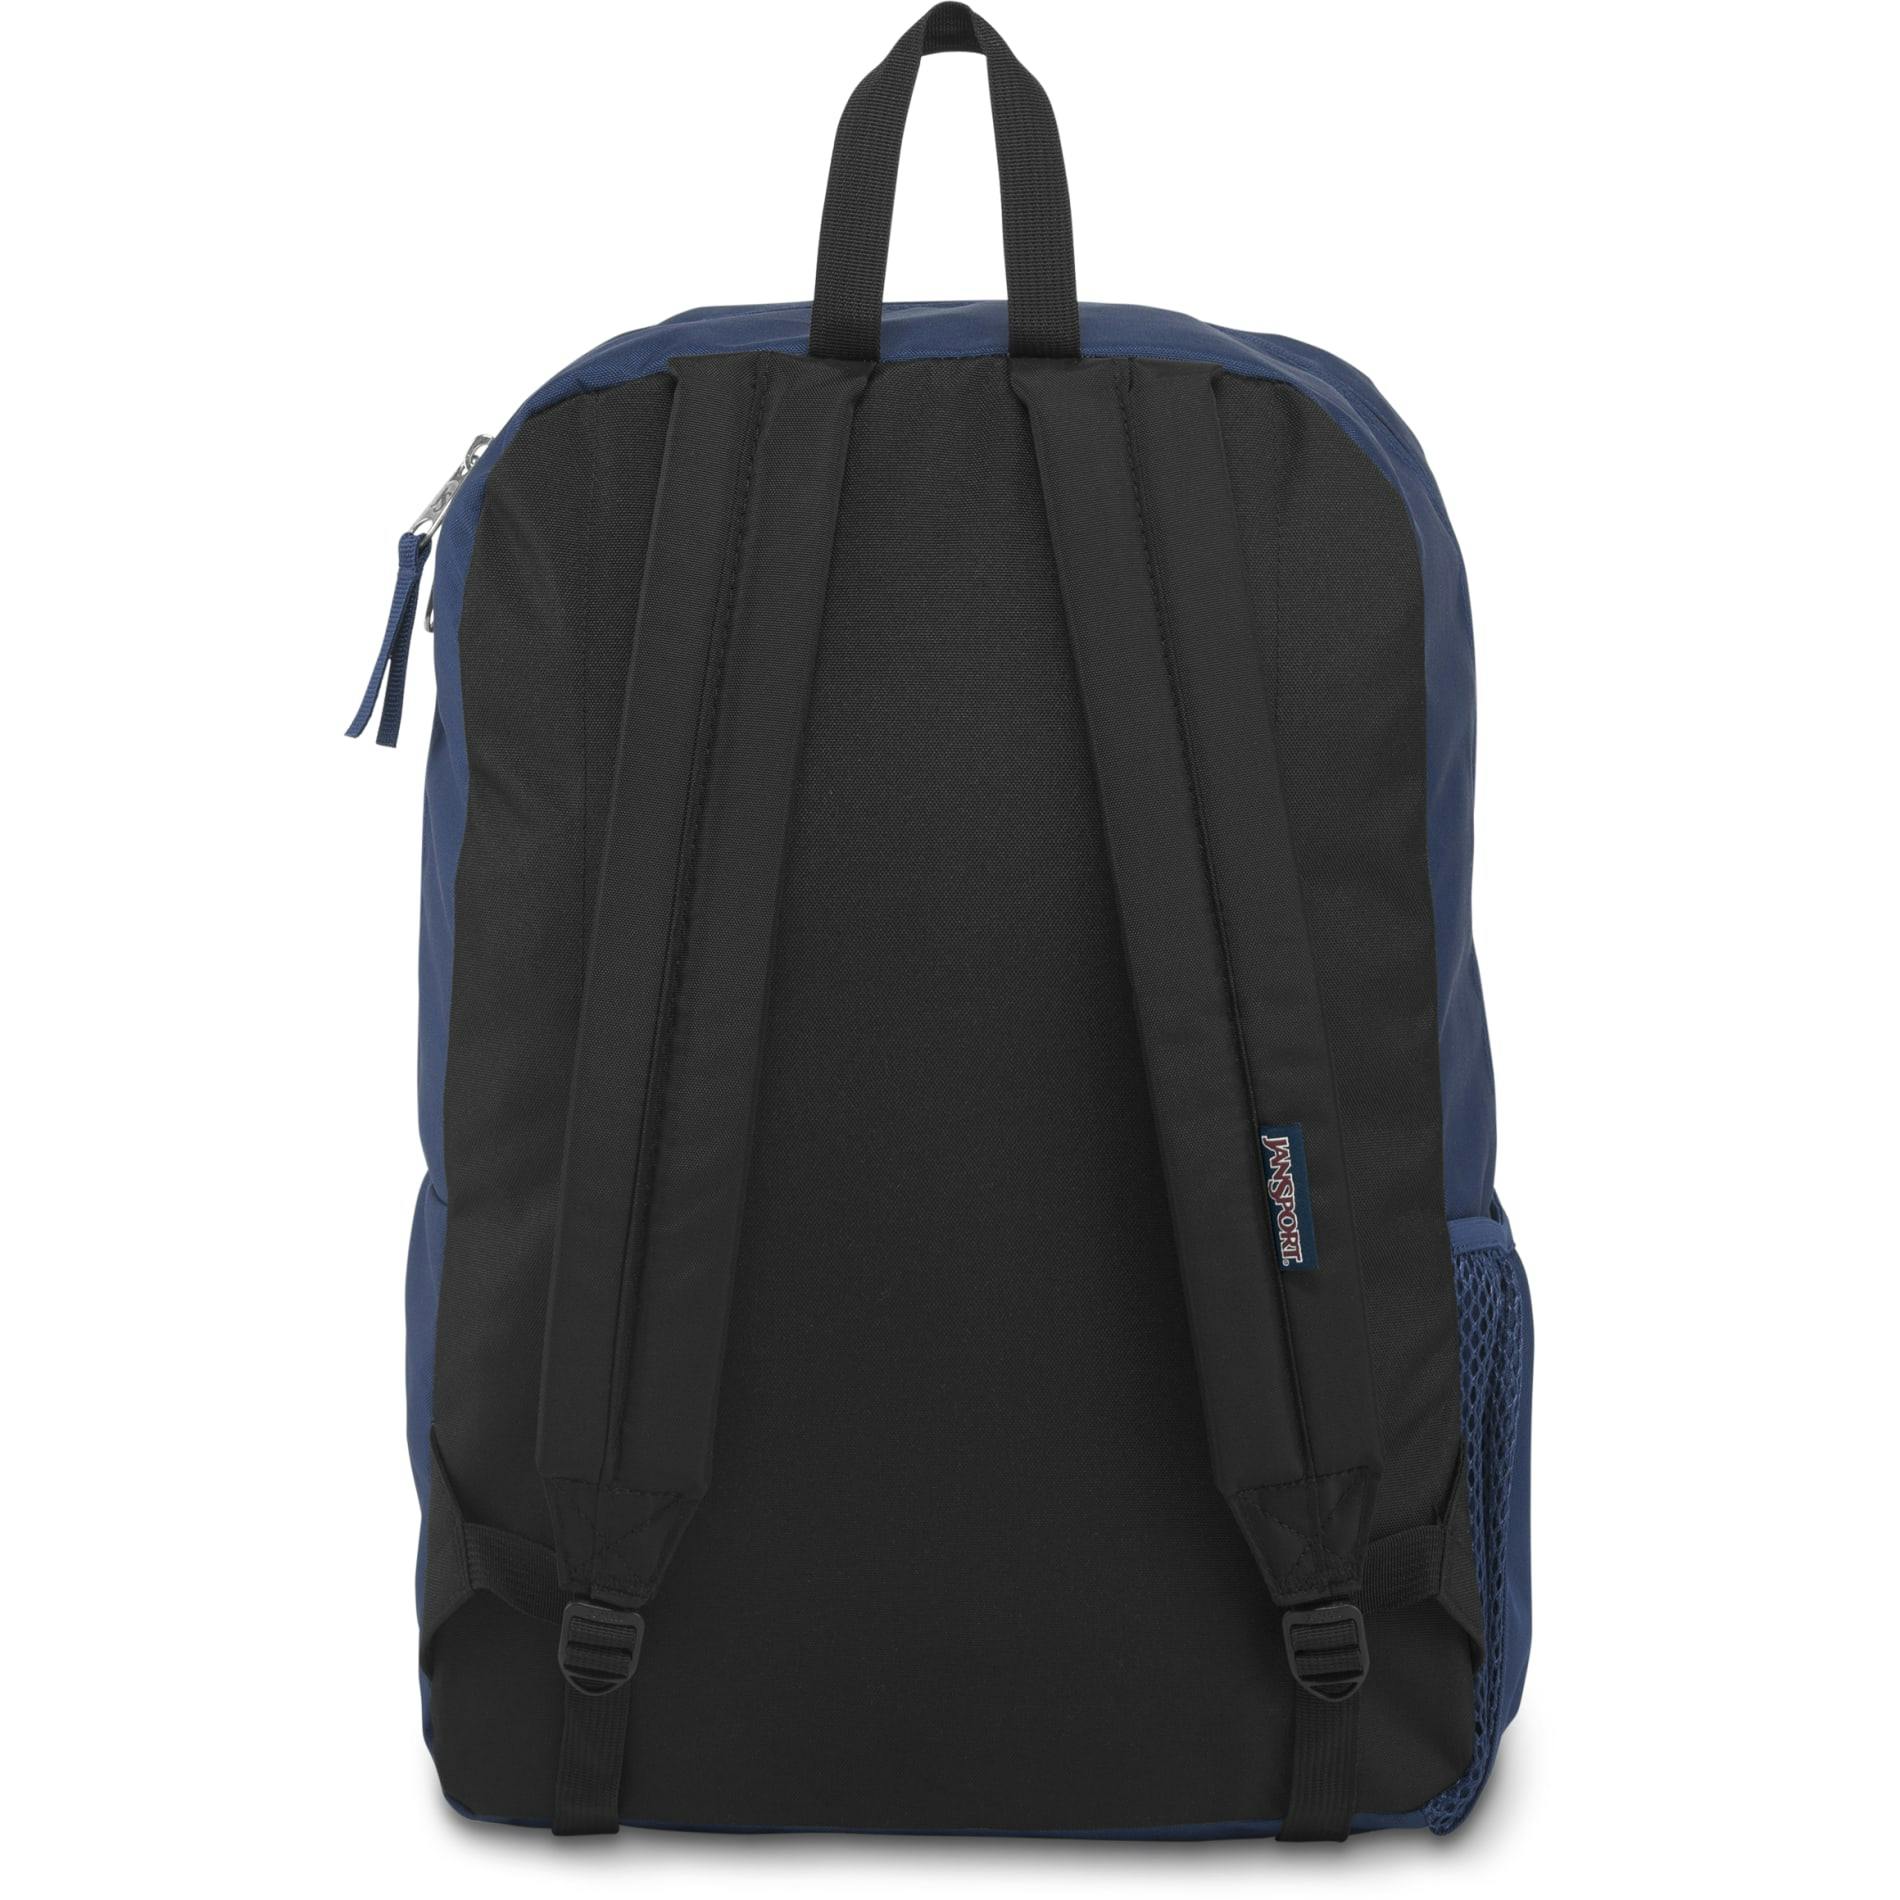 JanSport Crosstown Backpack - additional Image 3